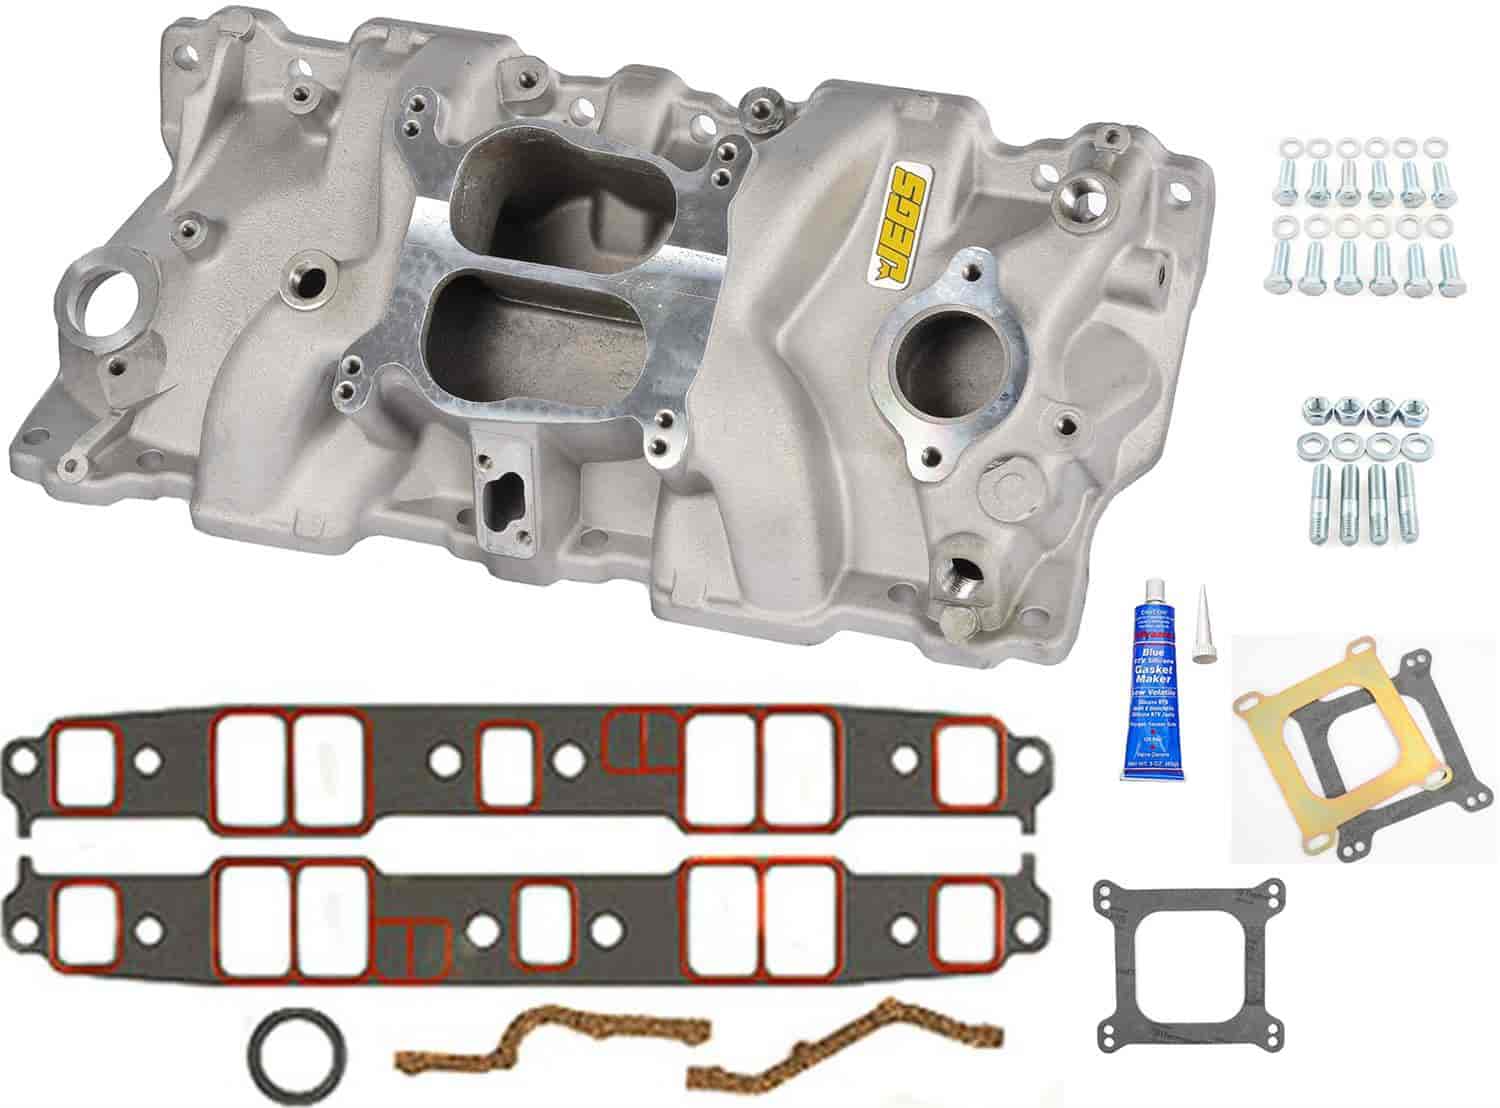 JEGS Intake Manifold with Installation Kit for 1955-1986 Small Block Chevy 262-400